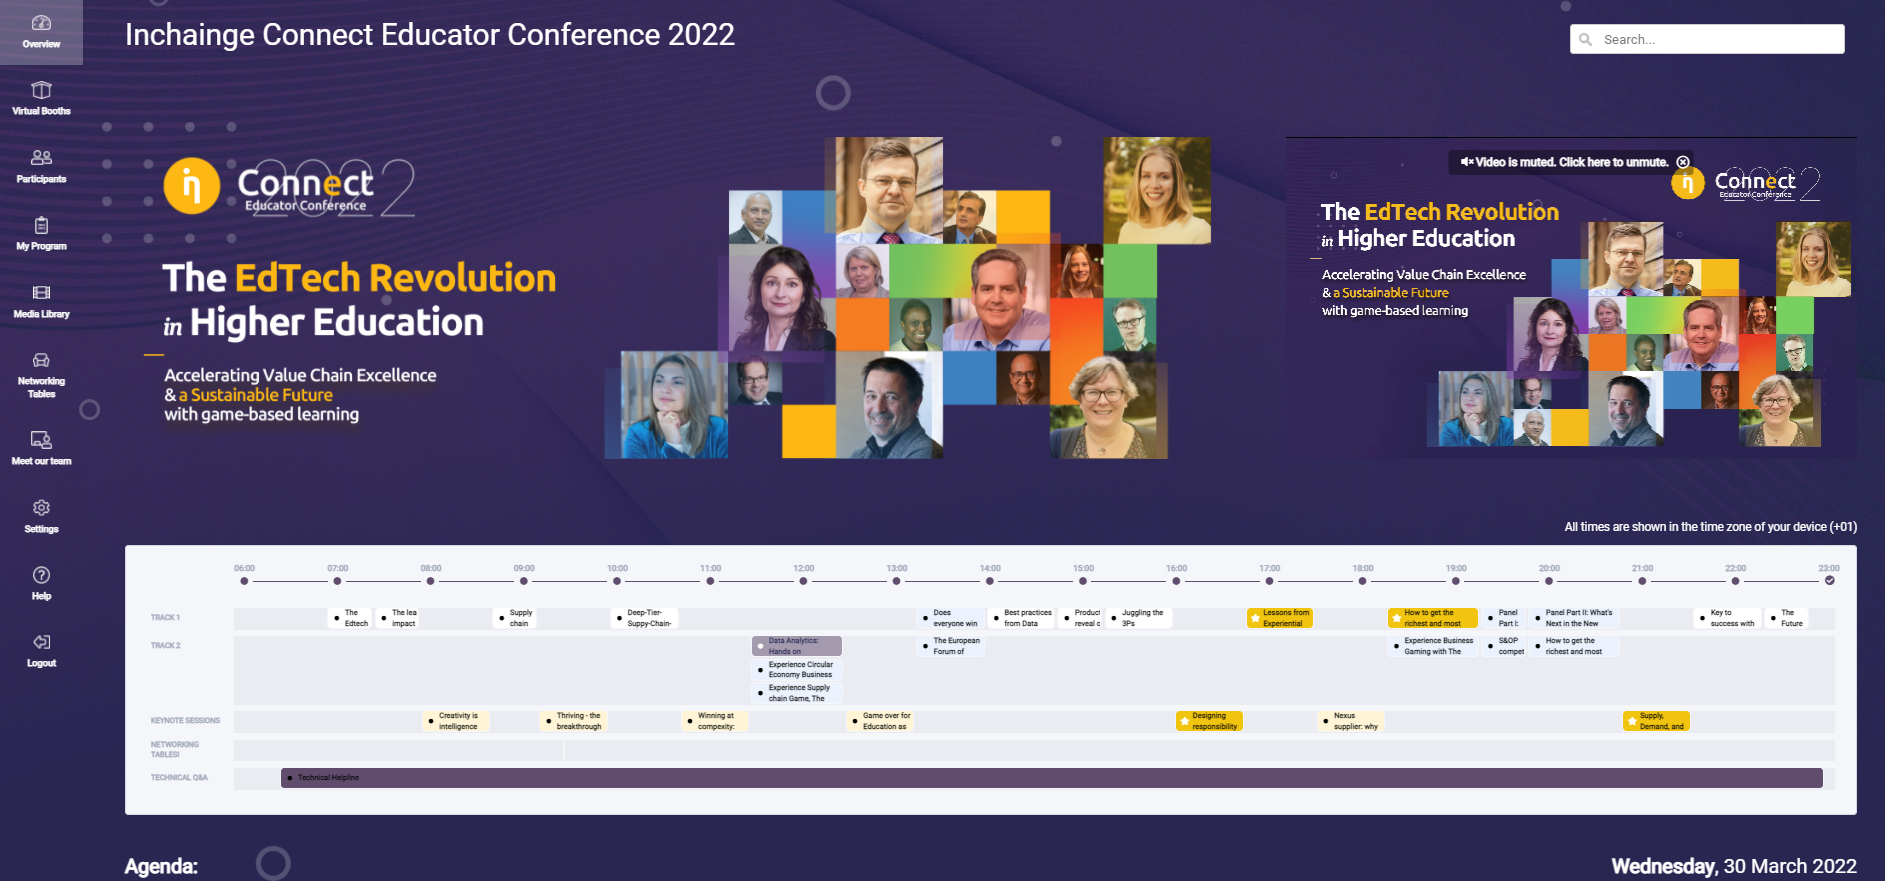 Inchainge Connect Educator Conference 2022 was held on an online platform Scoocs. This year's theme was 'The EdTech Revolution in Higher Education – Accelerating Value Chain Excellence & a Sustainable Future with game-based learning’ 